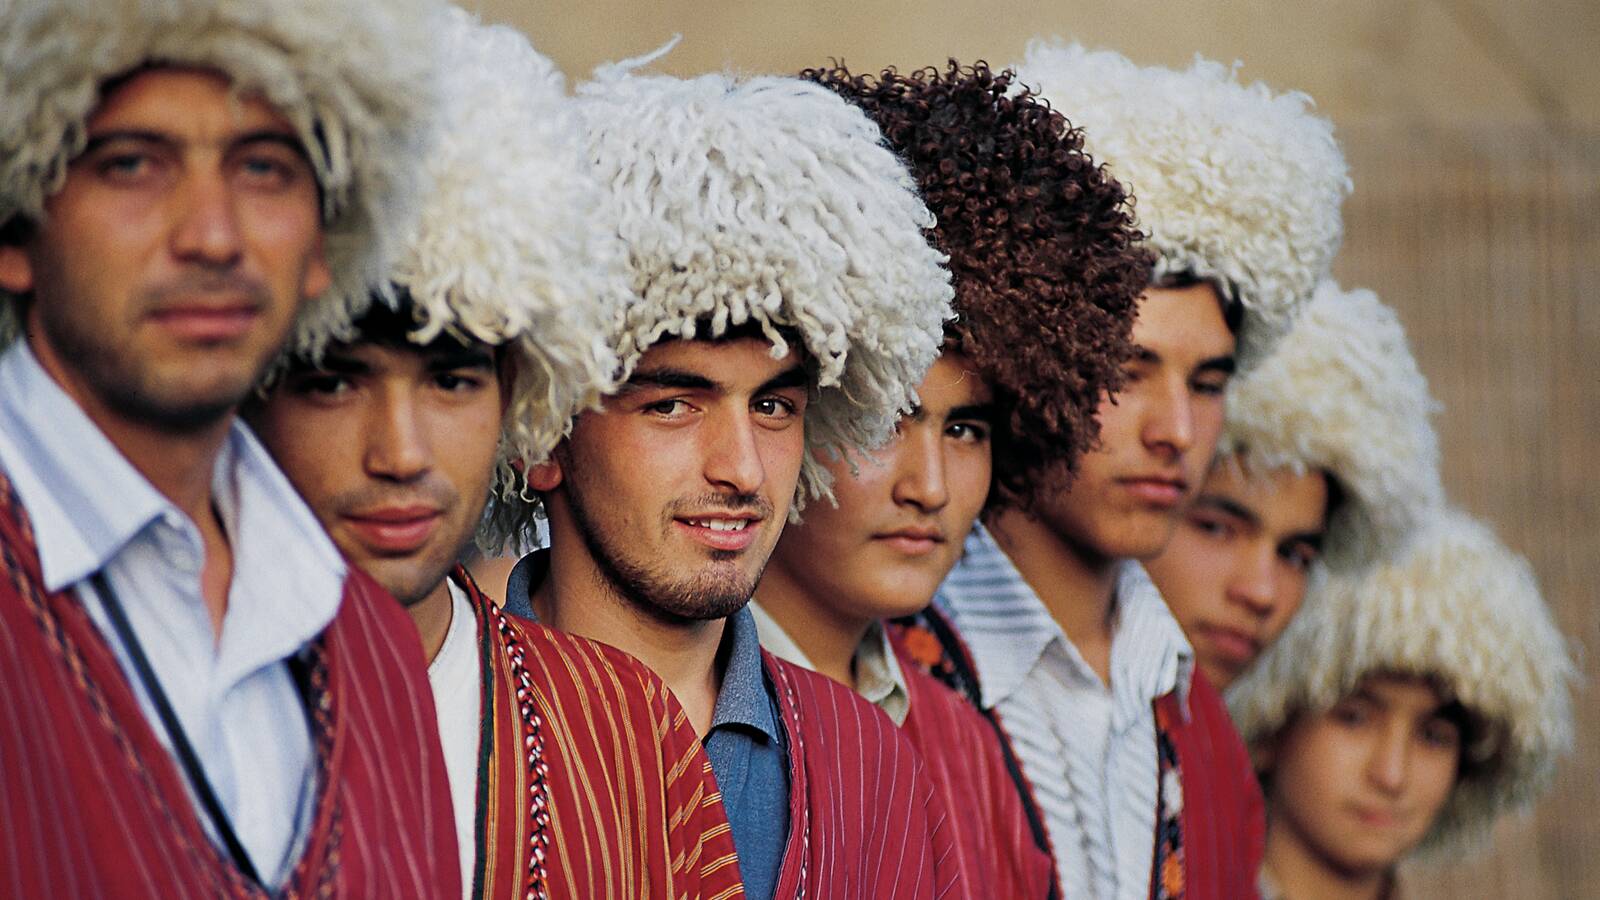 Traditional Clothes of Golestan Province 